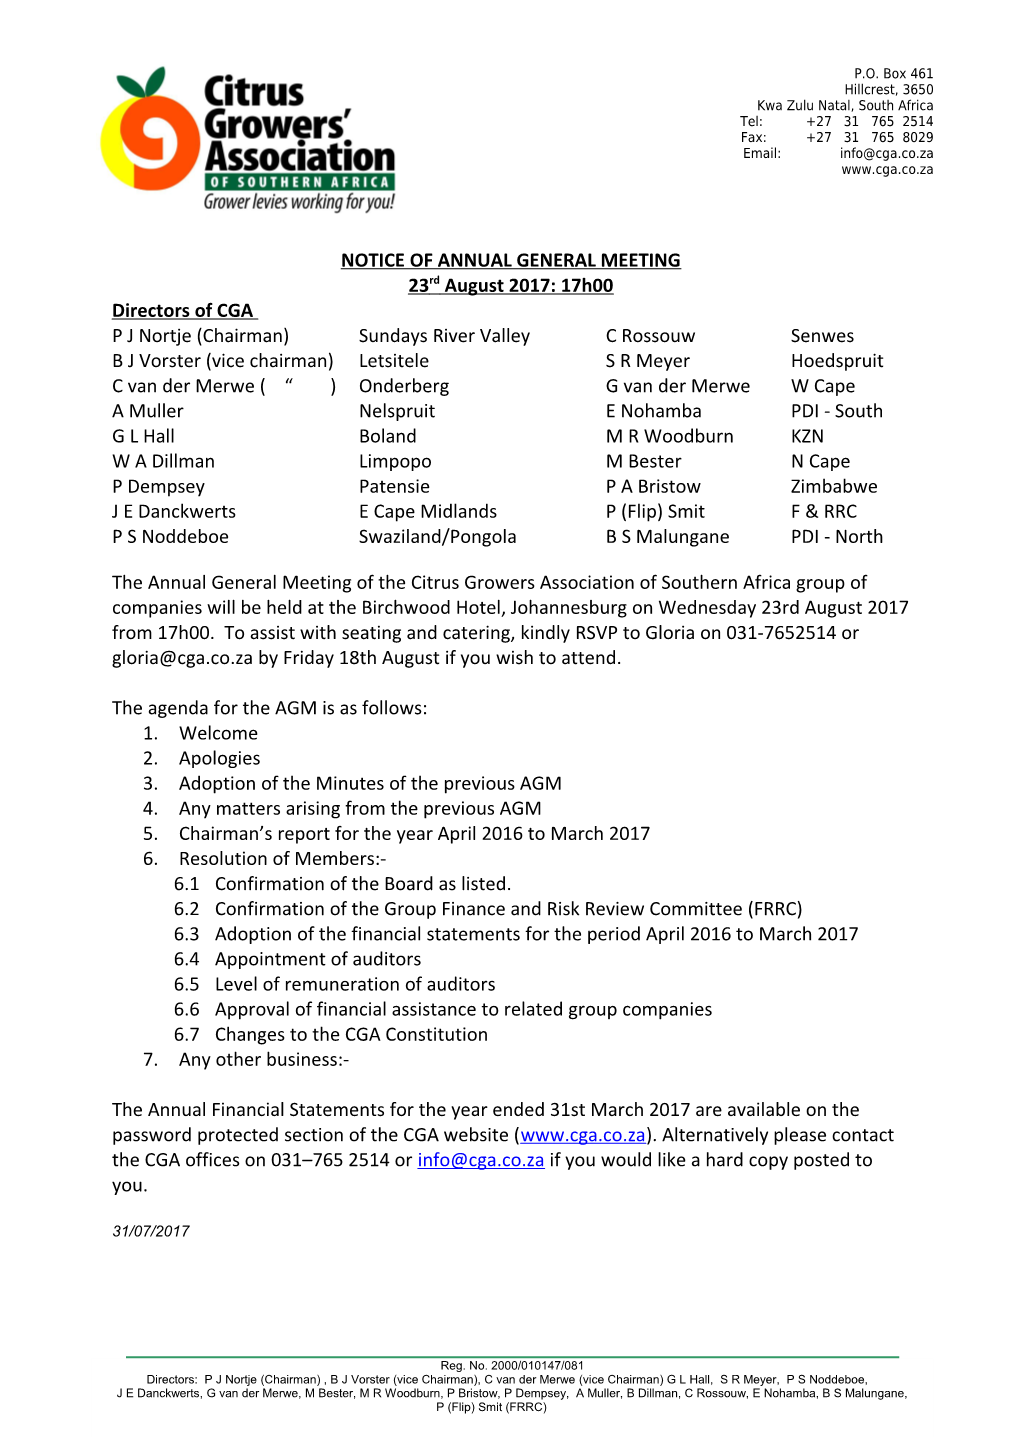 Notice of Annual General Meeting s2